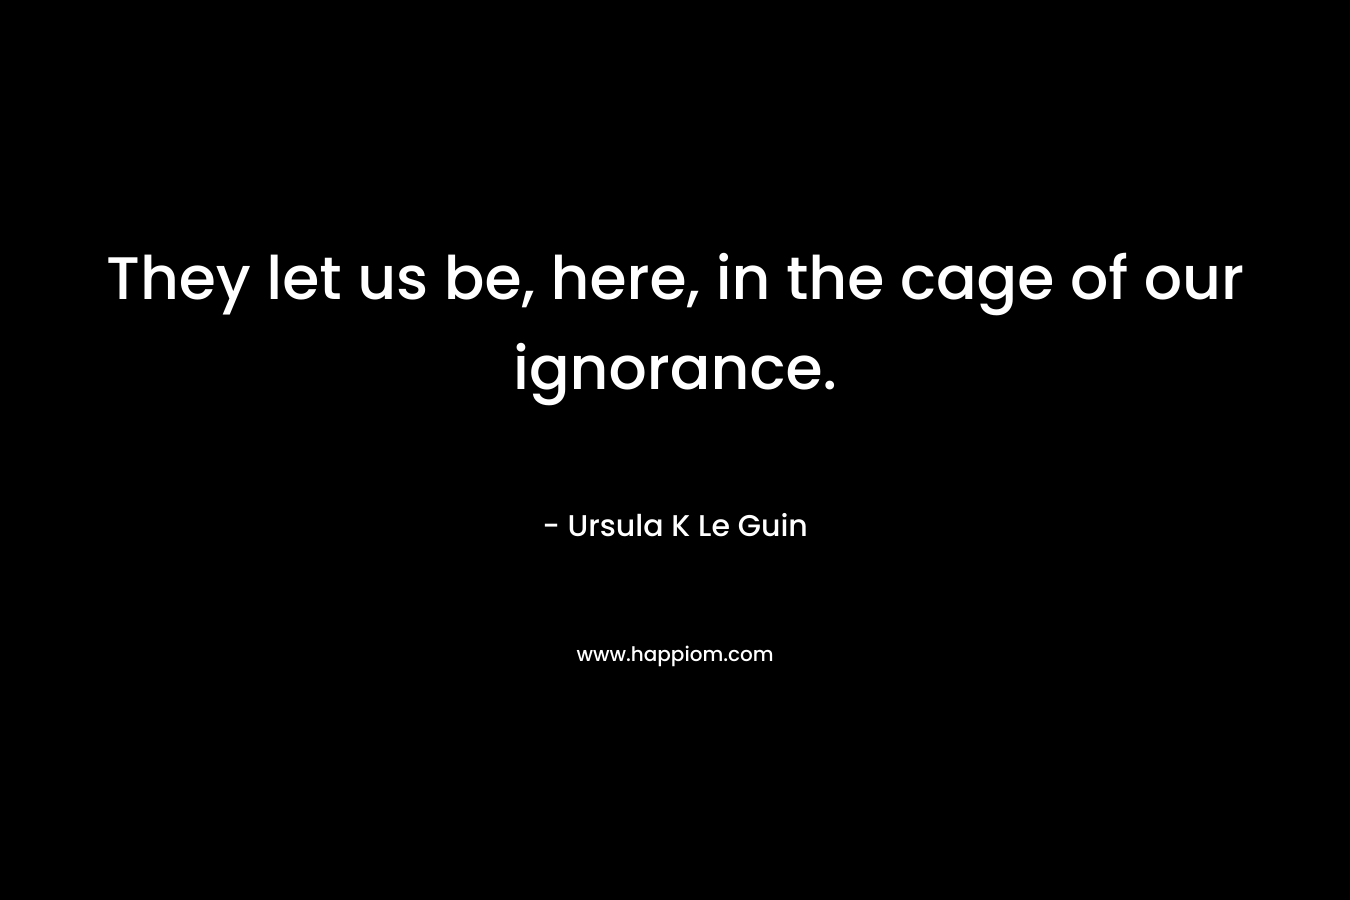 They let us be, here, in the cage of our ignorance. – Ursula K Le Guin